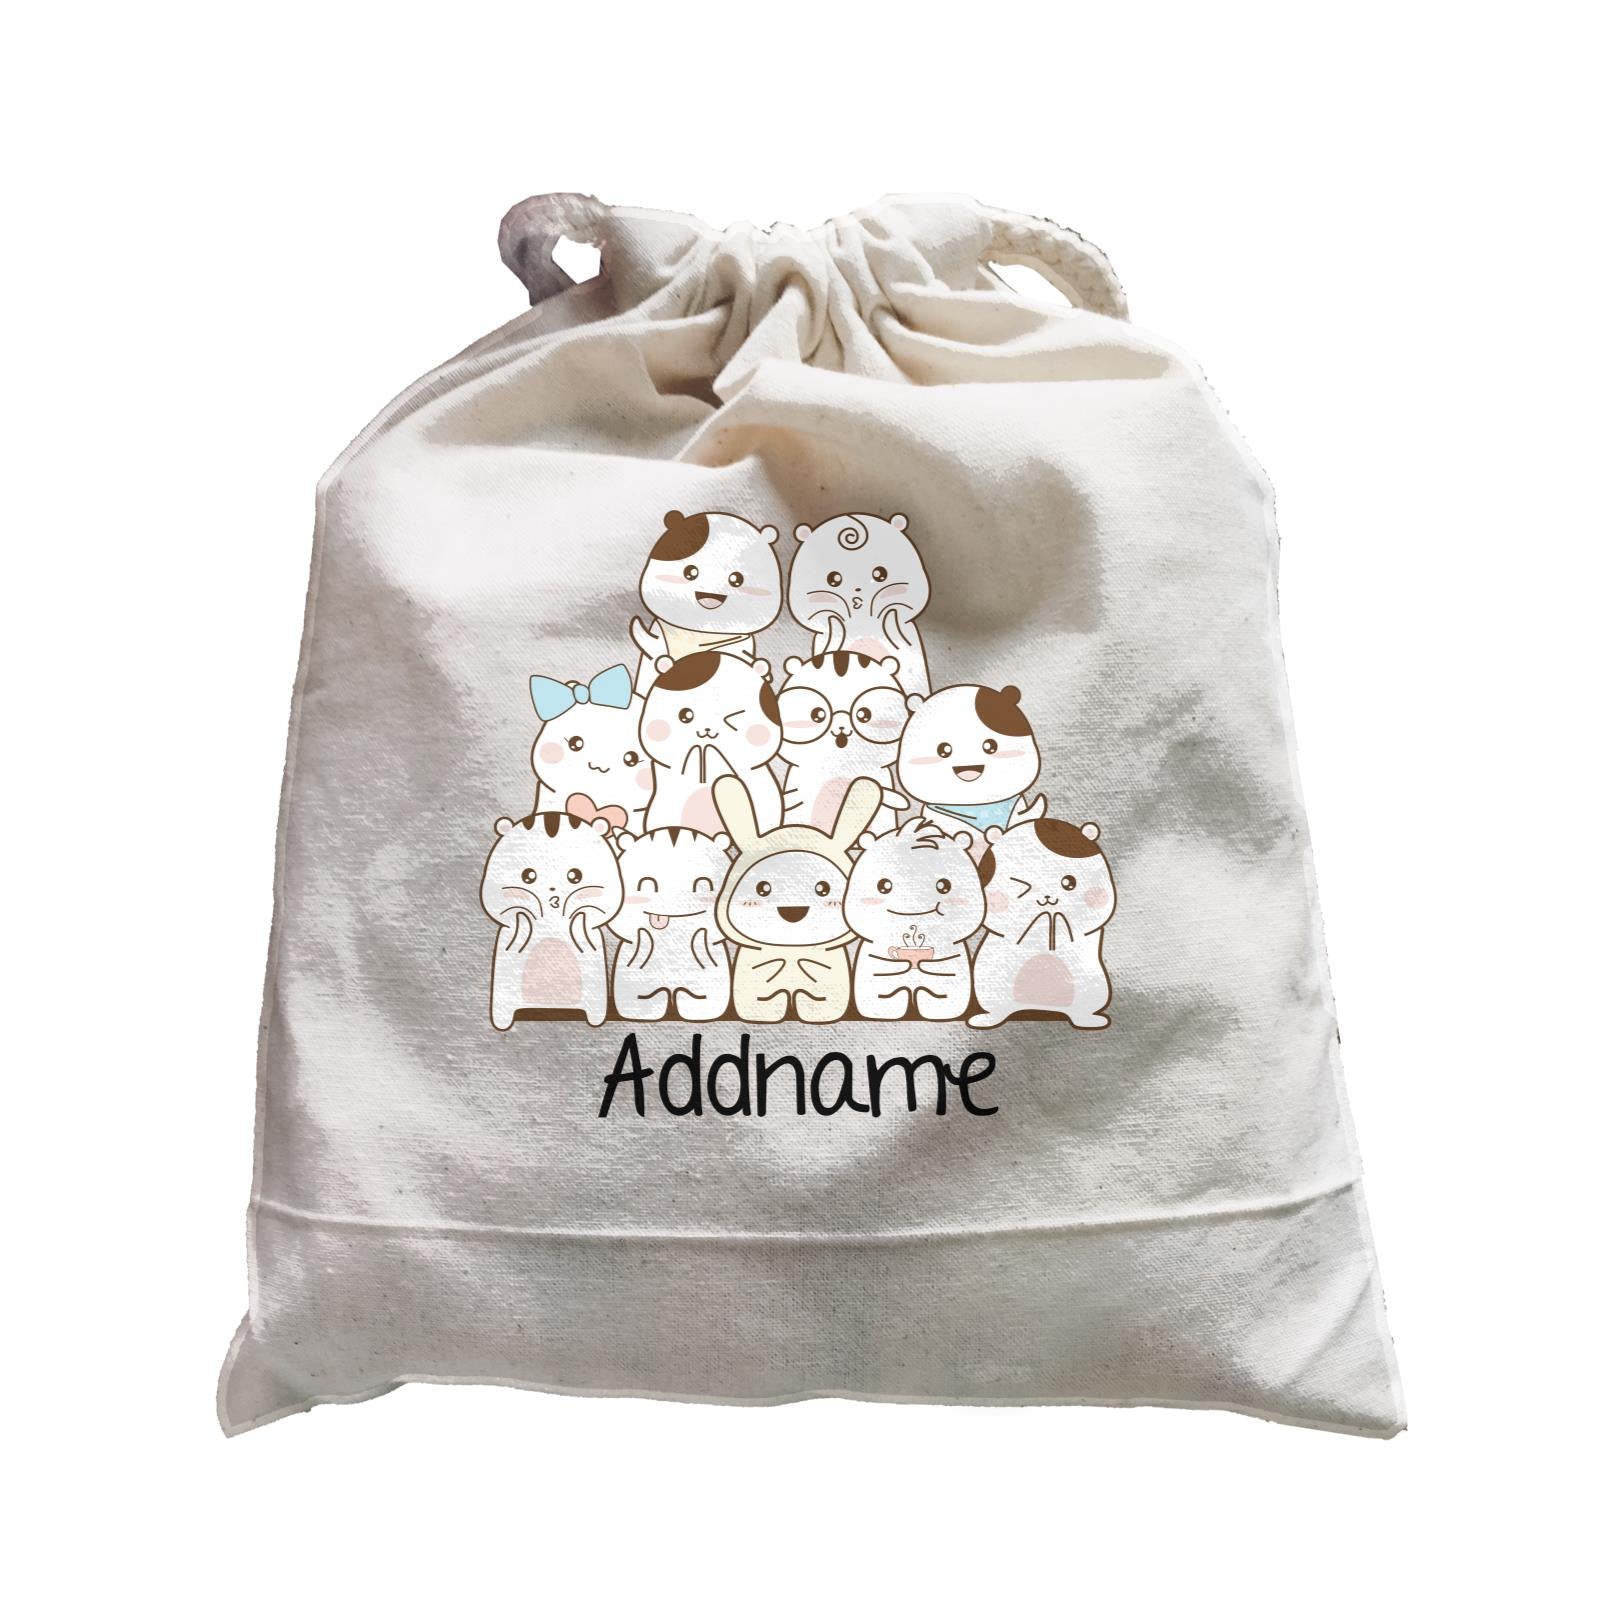 Cute Animals And Friends Series Cute Hamster Group Addname Satchel